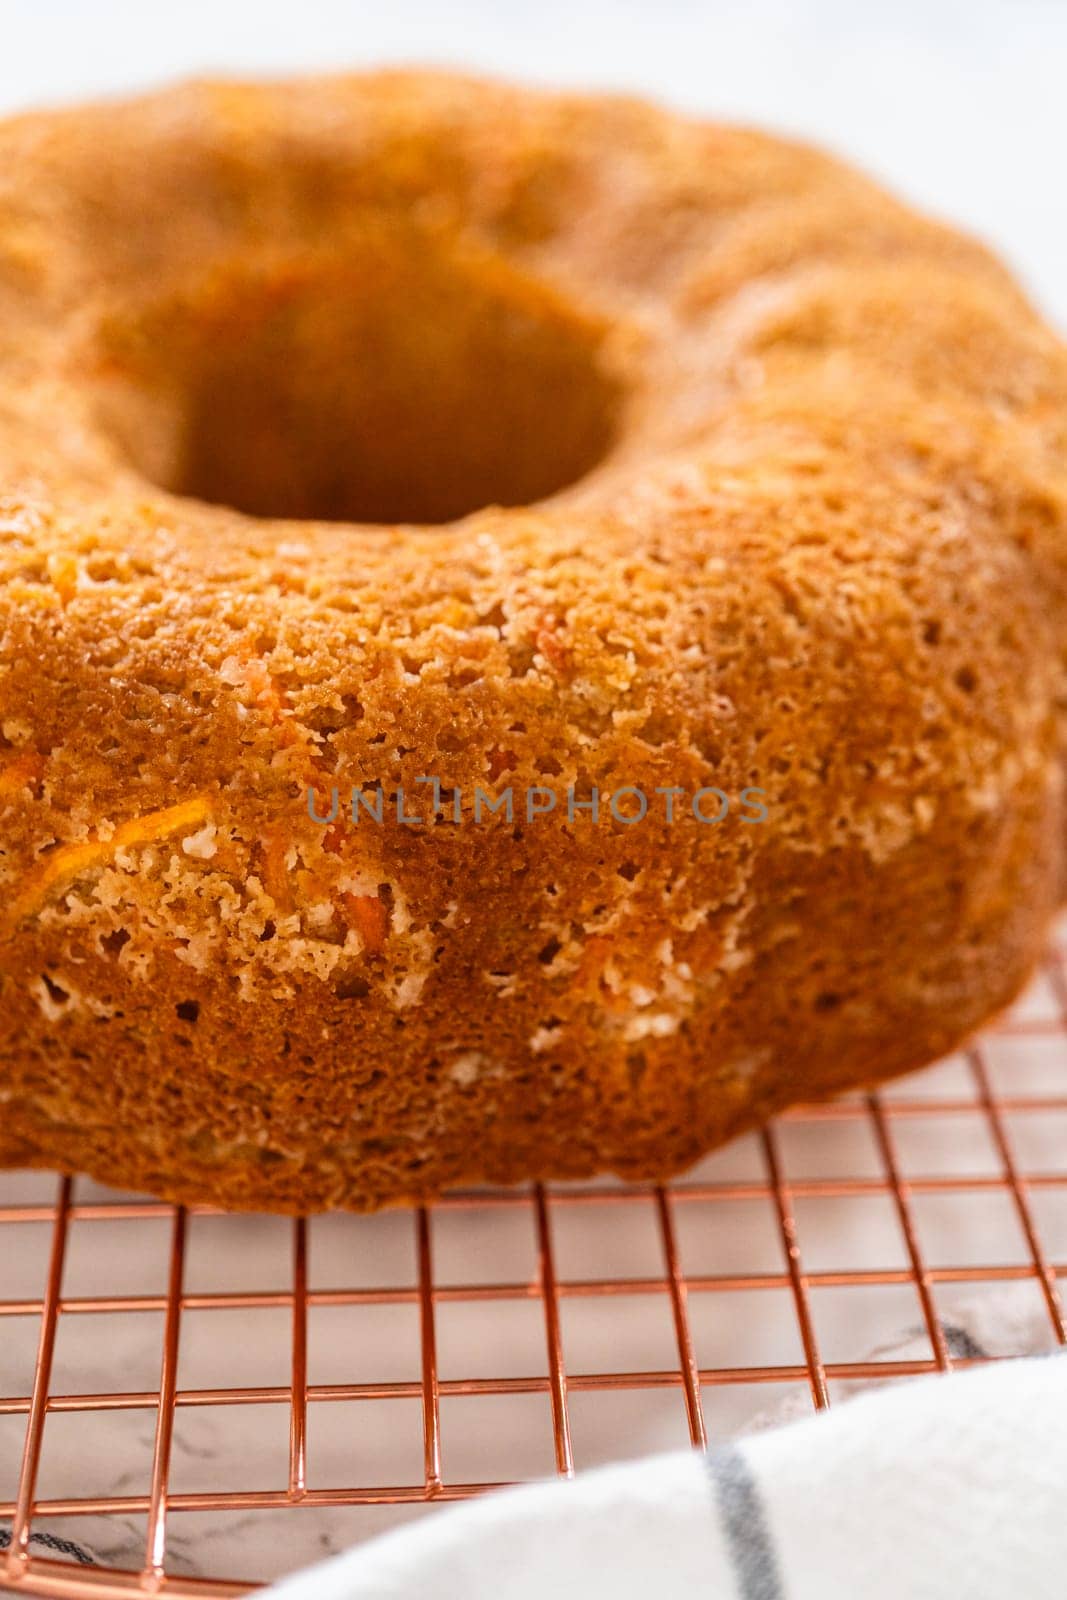 Cooling Delight: Freshly Baked Carrot Bundt Cake by arinahabich